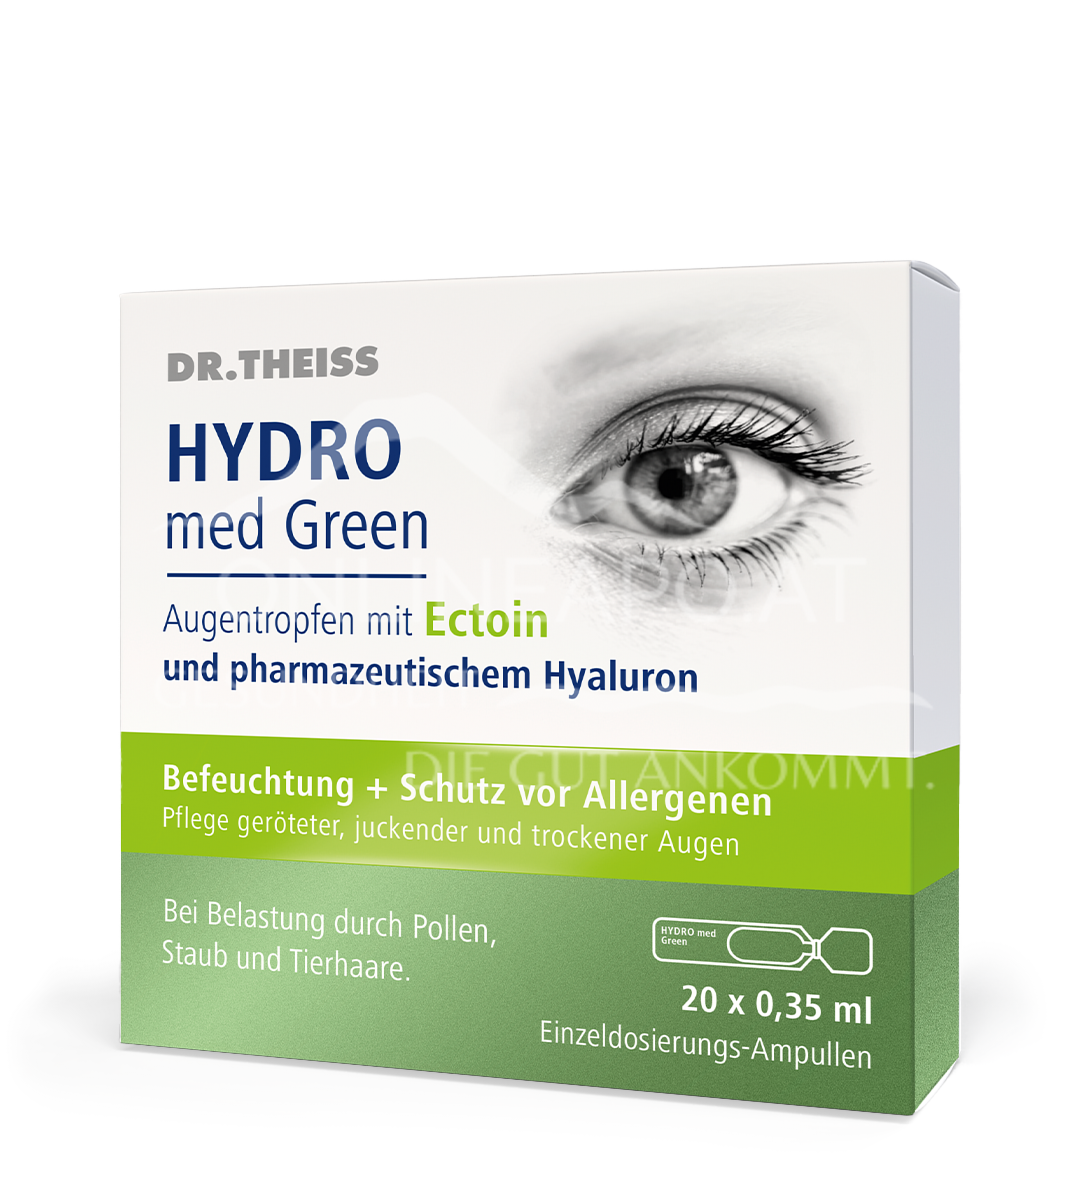 Dr. Theiss HYDRO med Green Augentropfen Monodose